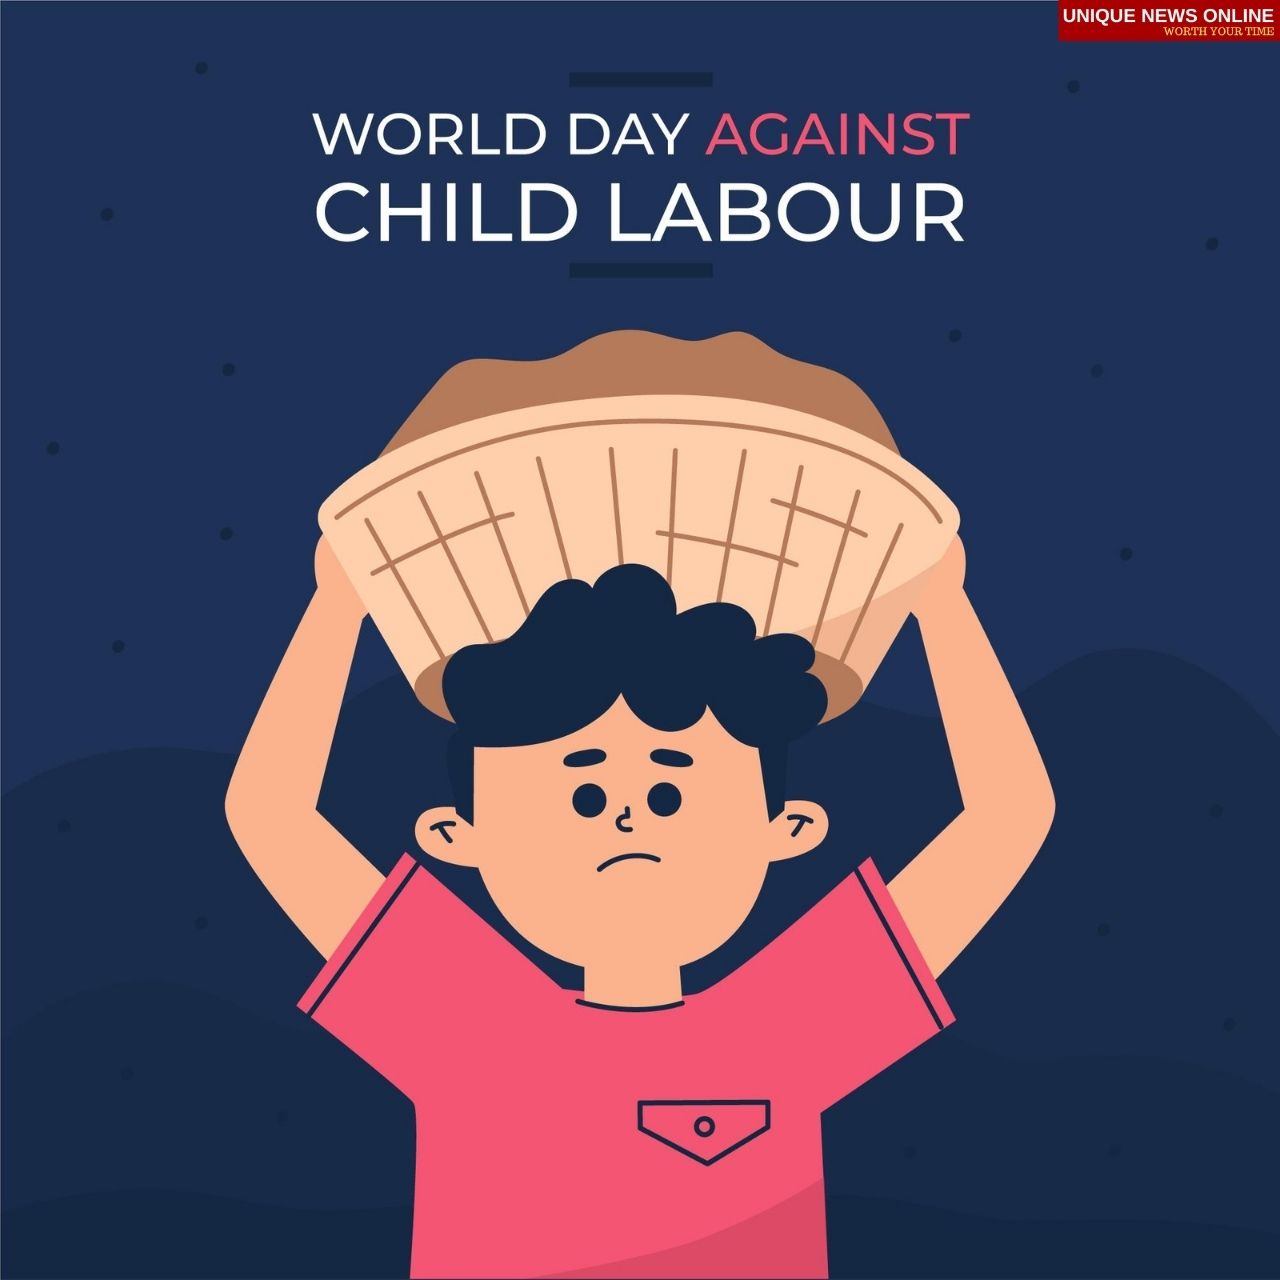 World Day Against Child Labour 2021 Date, Significance and Celebrations: Here’s Why It Is Important to Observe the Day and End Violence Against Children